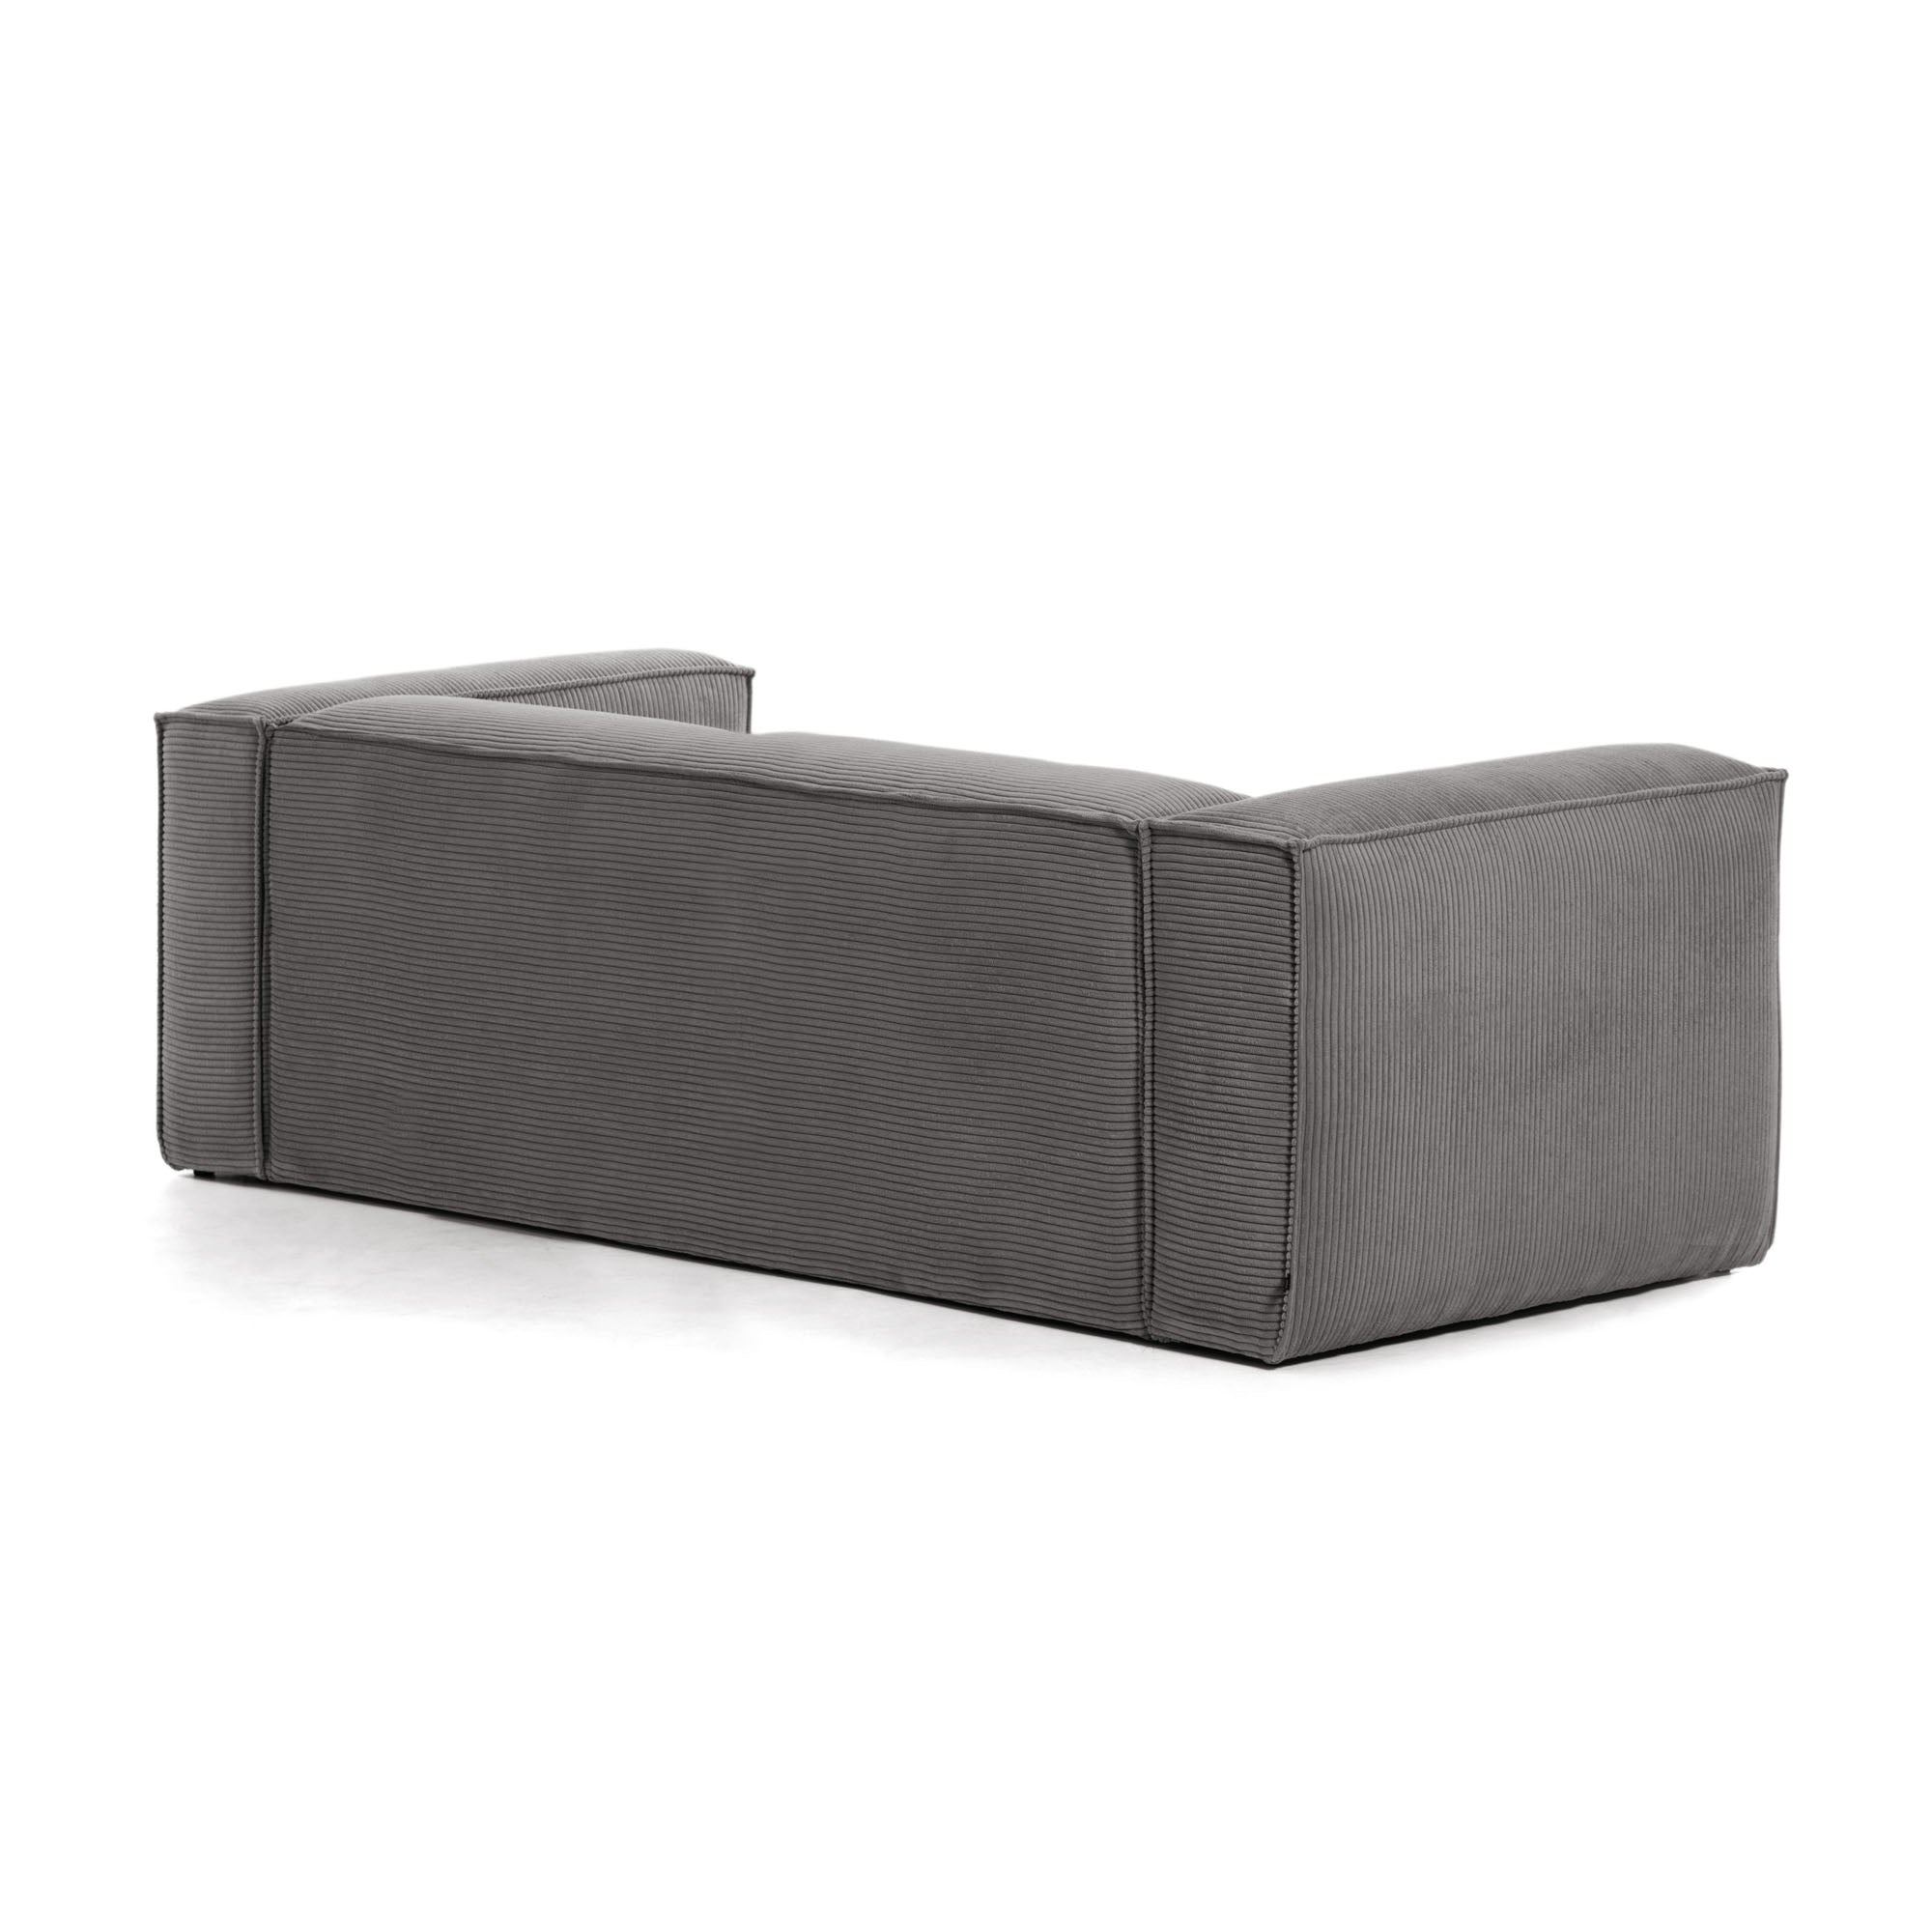 Blok 2 seater sofa with right side chaise longue in grey wide seam corduroy, 240 cm